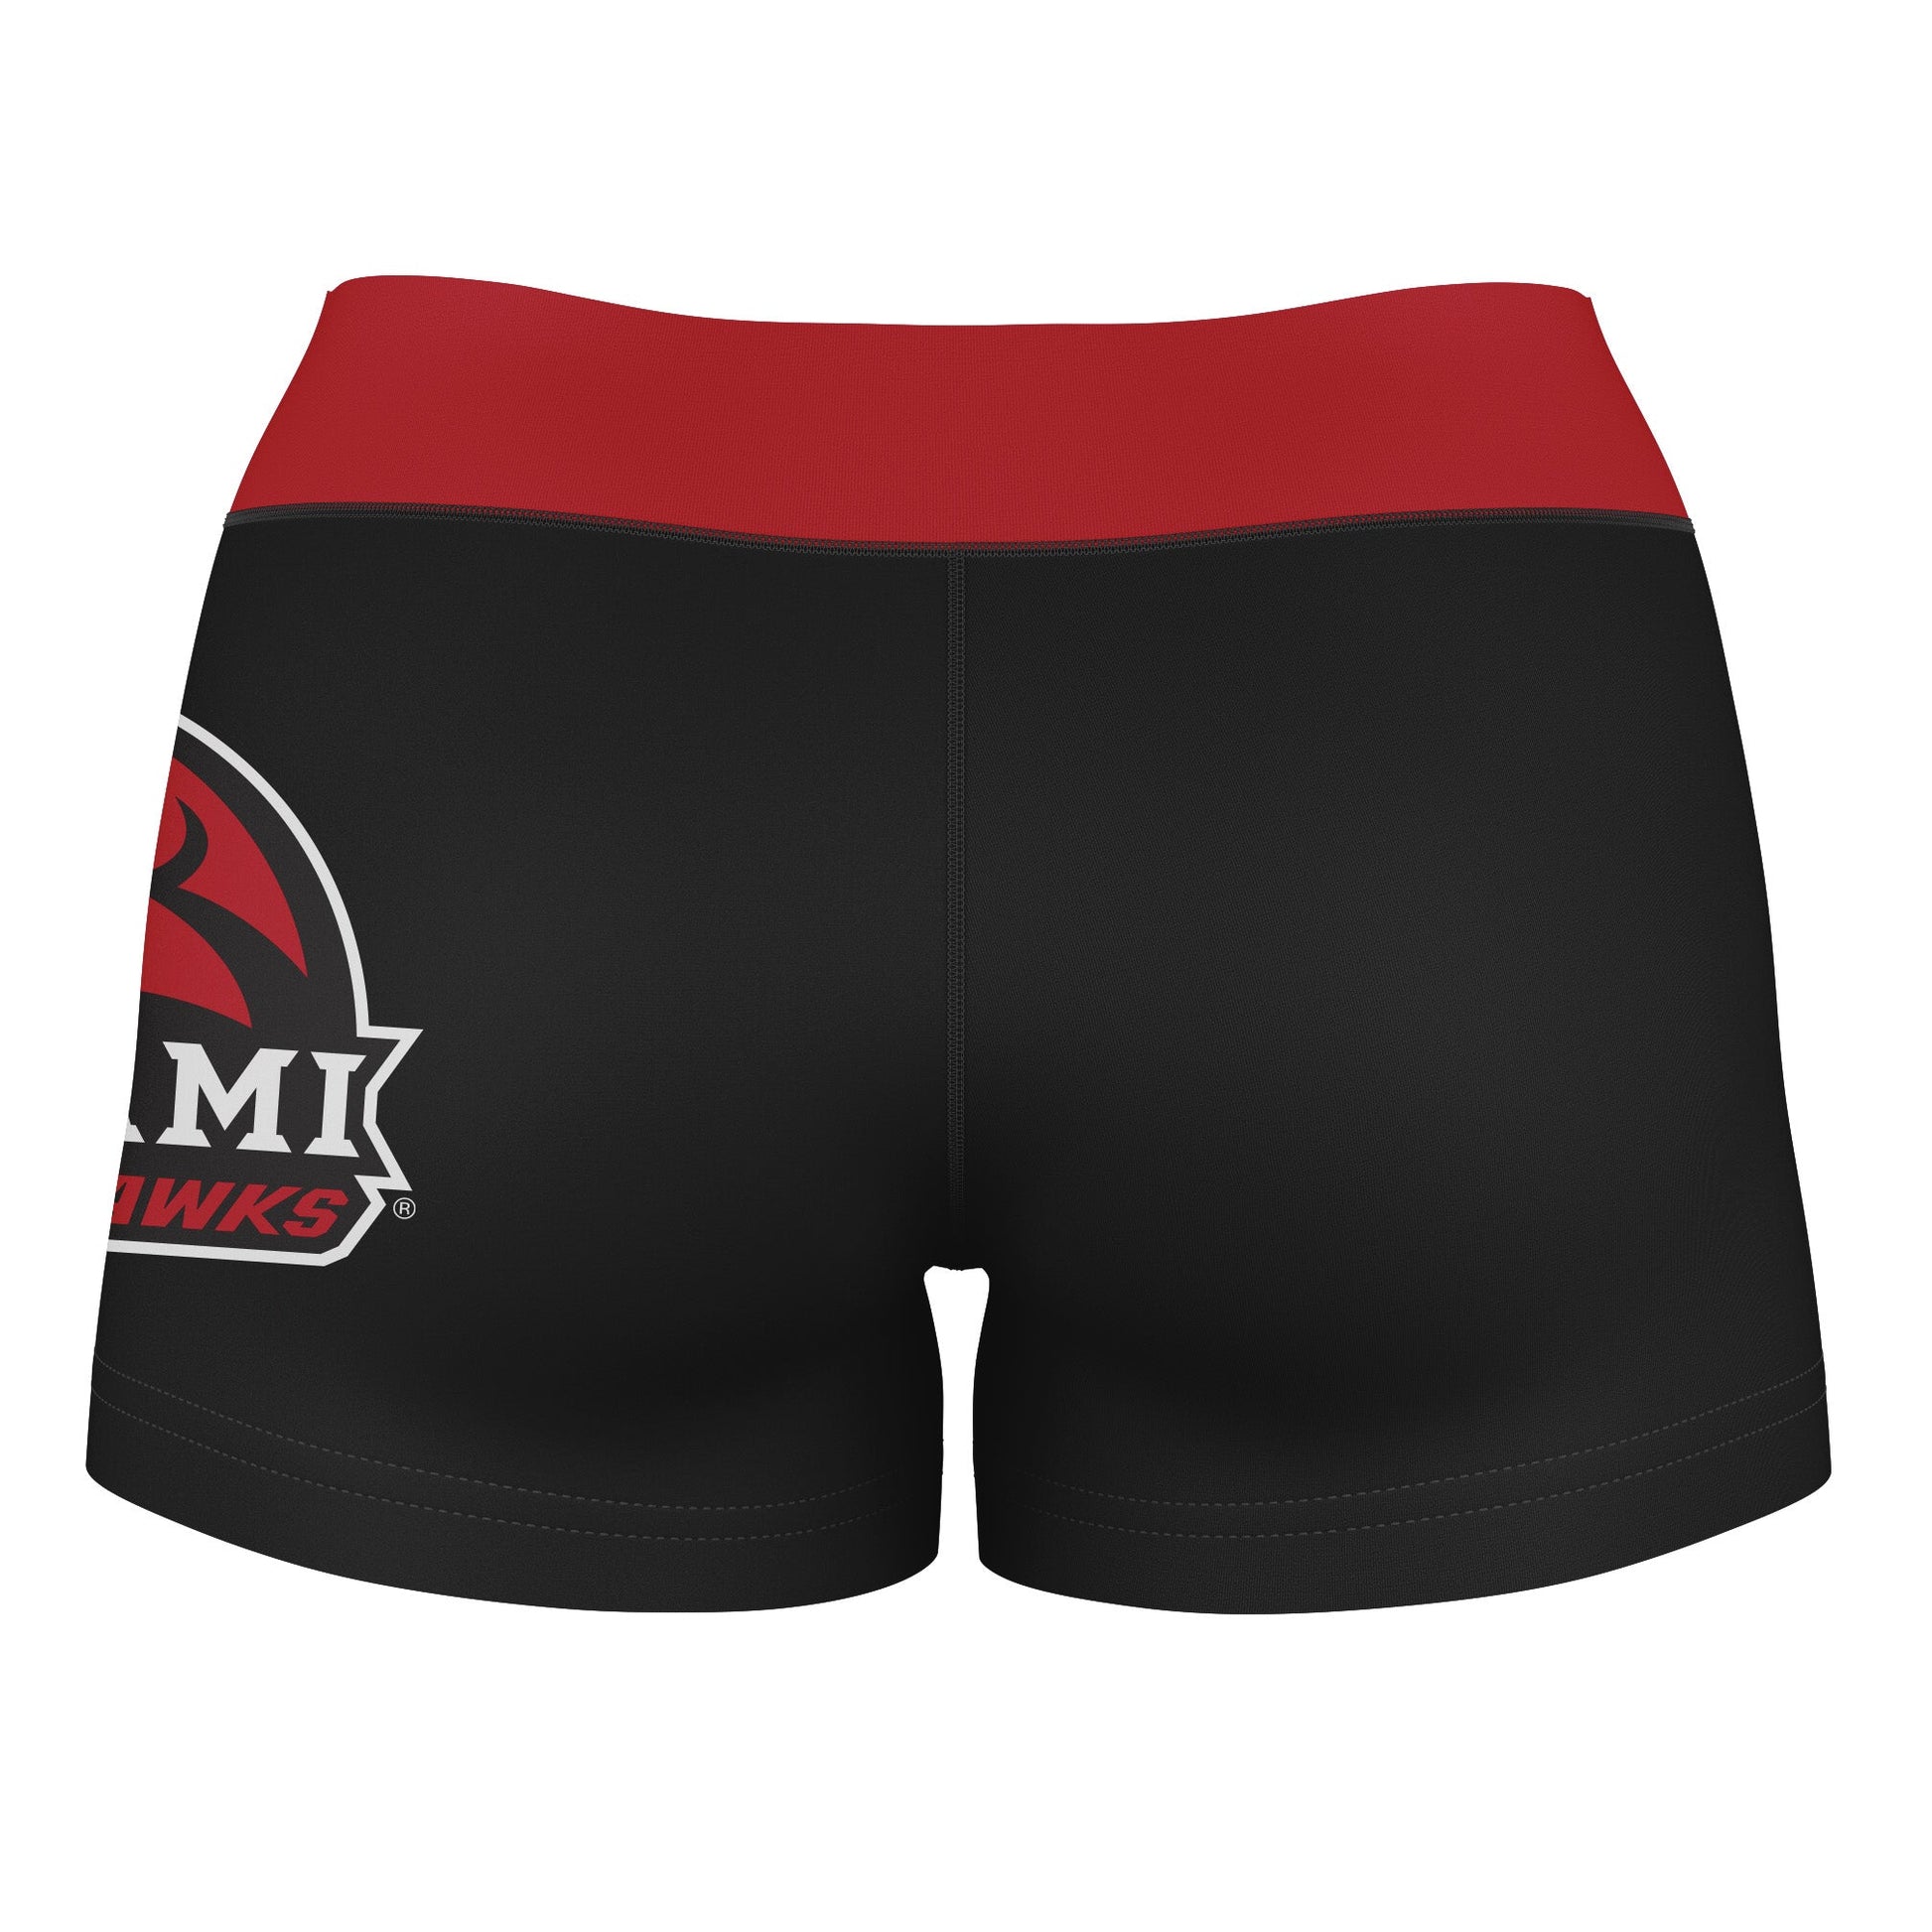 Miami Ohio RedHawks Vive La Fete Logo on Thigh and Waistband Black and Red Women Yoga Booty Workout Shorts 3.75 Inseam" - Vive La F̻te - Online Apparel Store